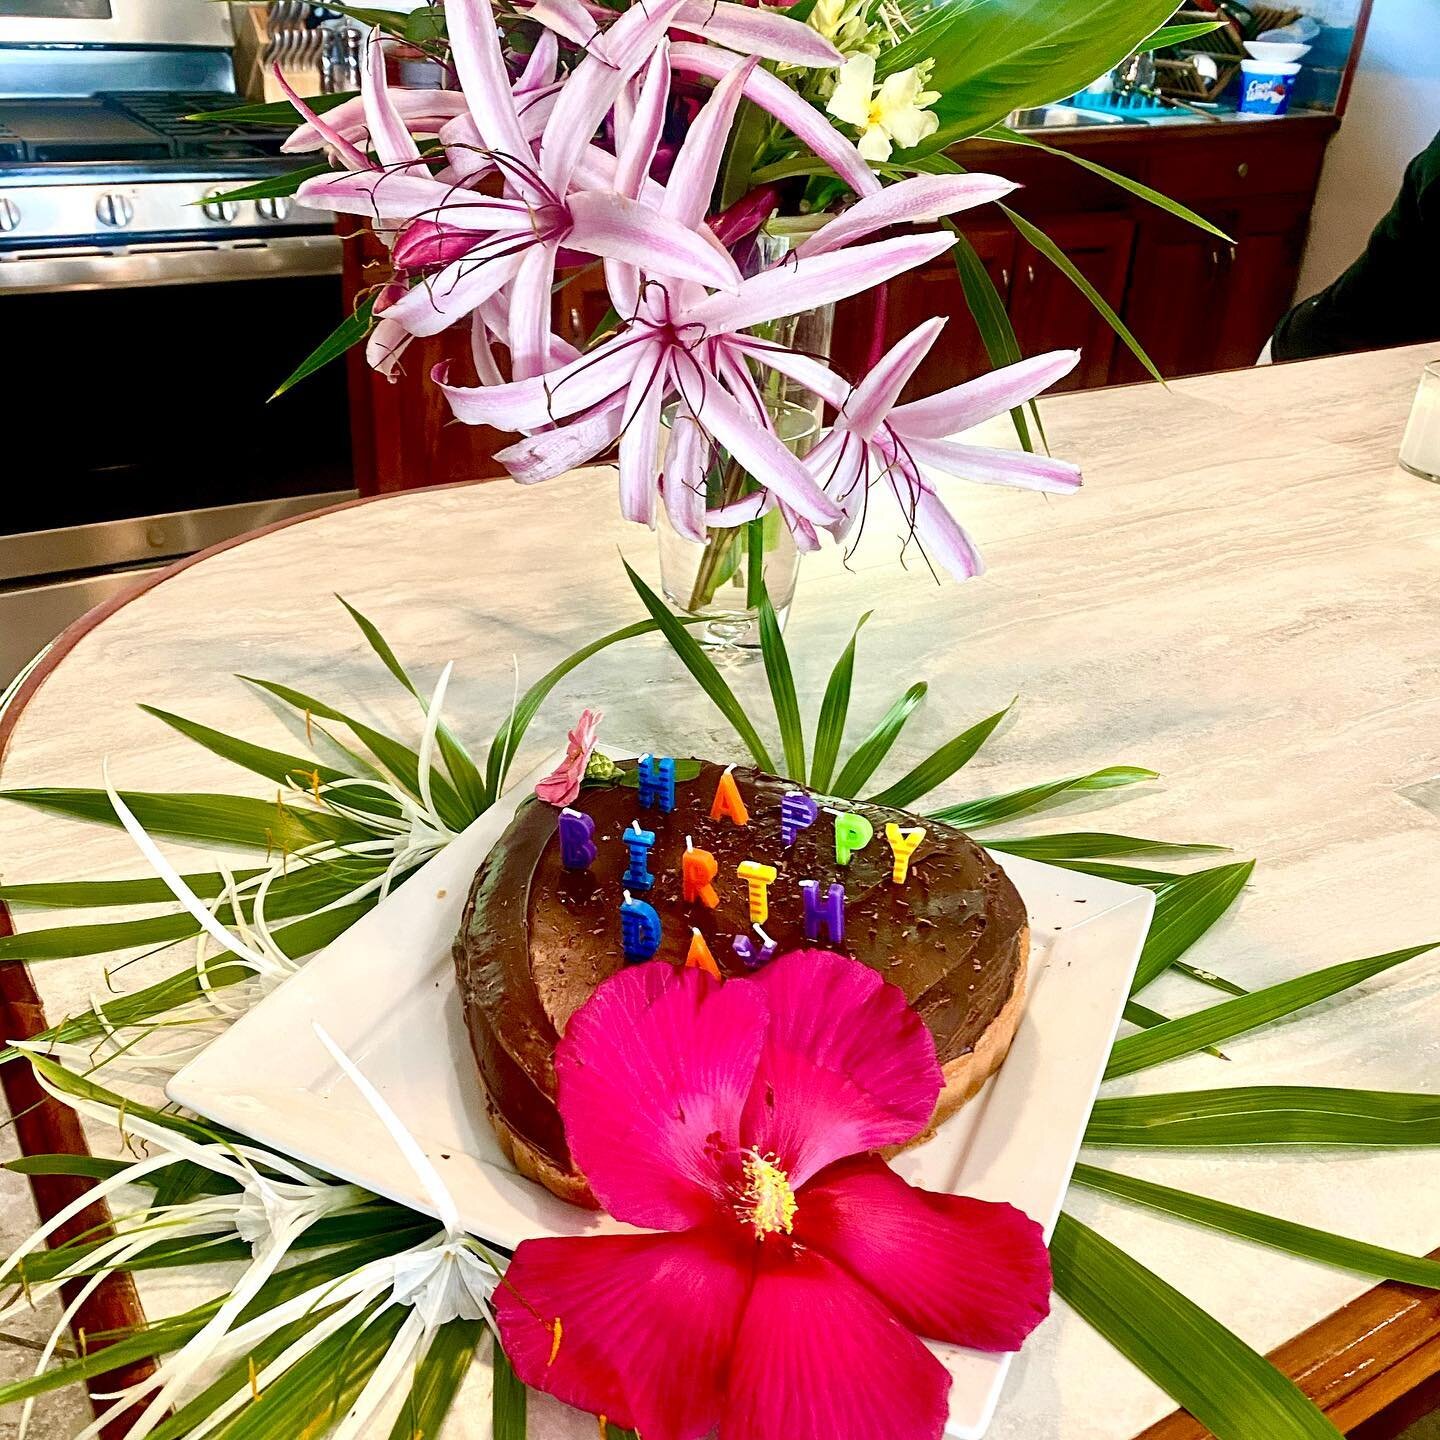 We had a wonderful time celebrating you Ashley Endris! We are glad we could make your birthday a special one and hope you enjoyed the cake created by our Private Chef Doris 🎂❤️ 

Safe travels ✈️ 

#casadeplayasolmate #belizetourism #SanPedro #amberg